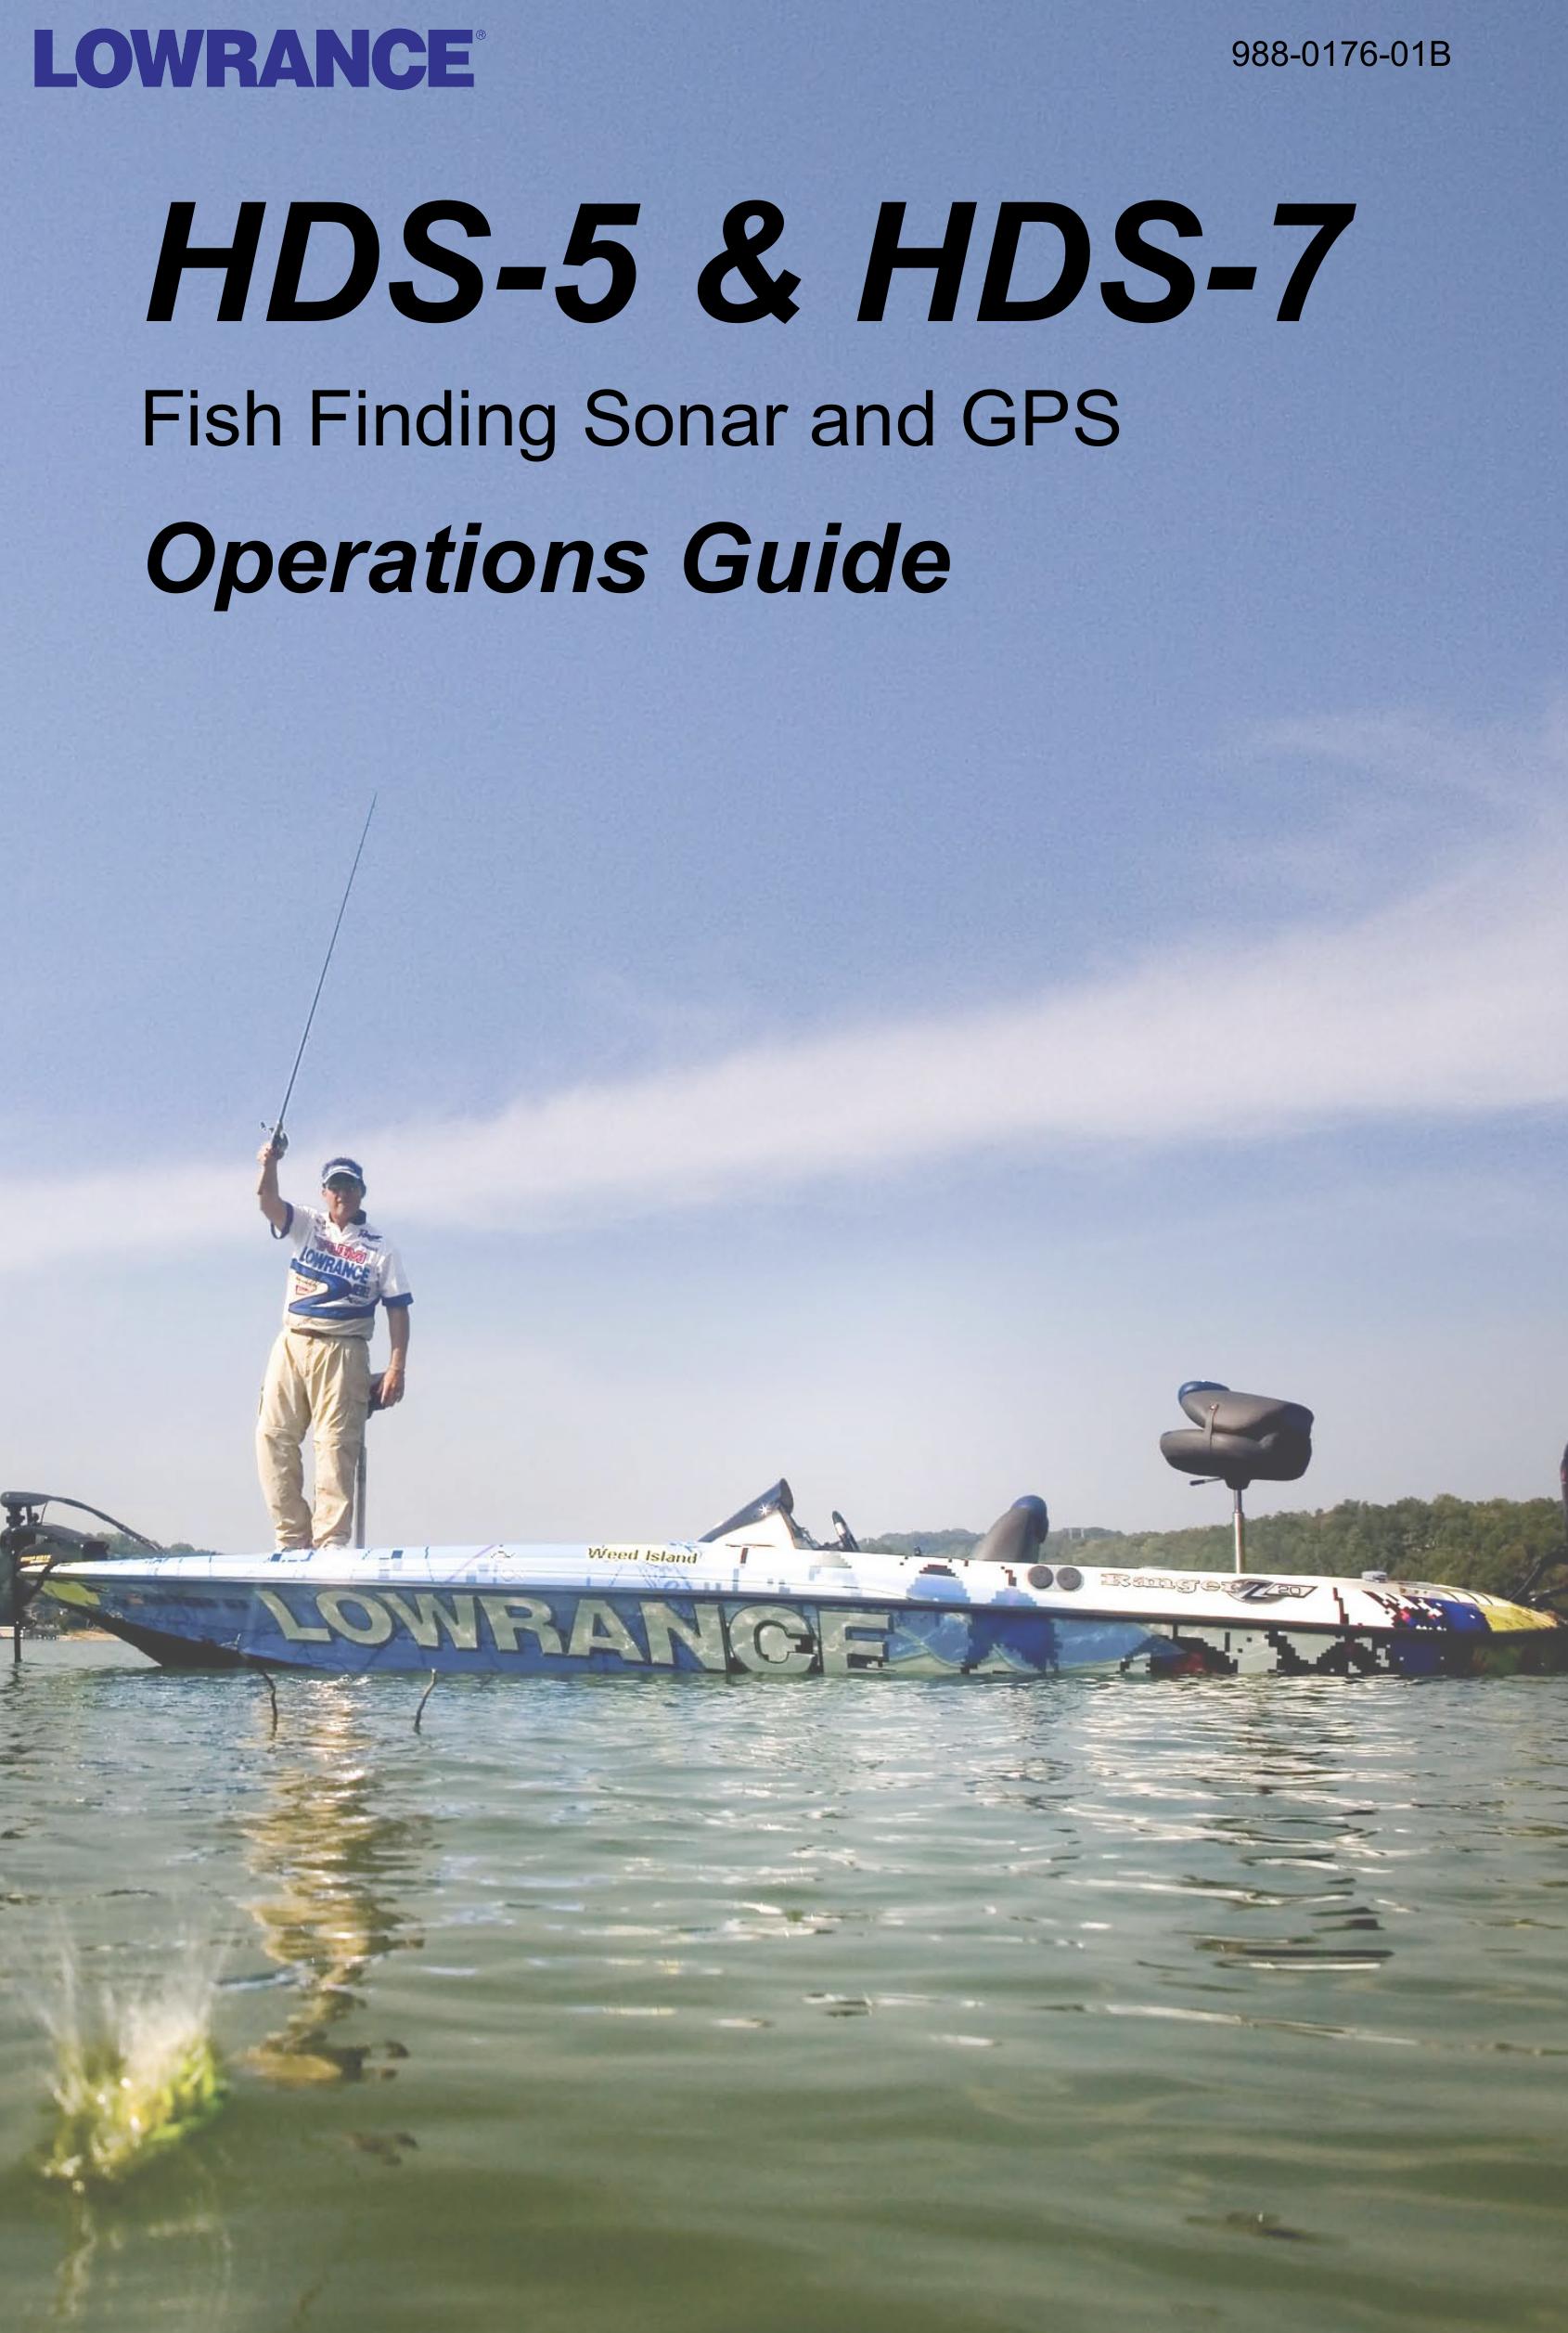 Lowrance electronic HDS-7 Fish Finder User Manual